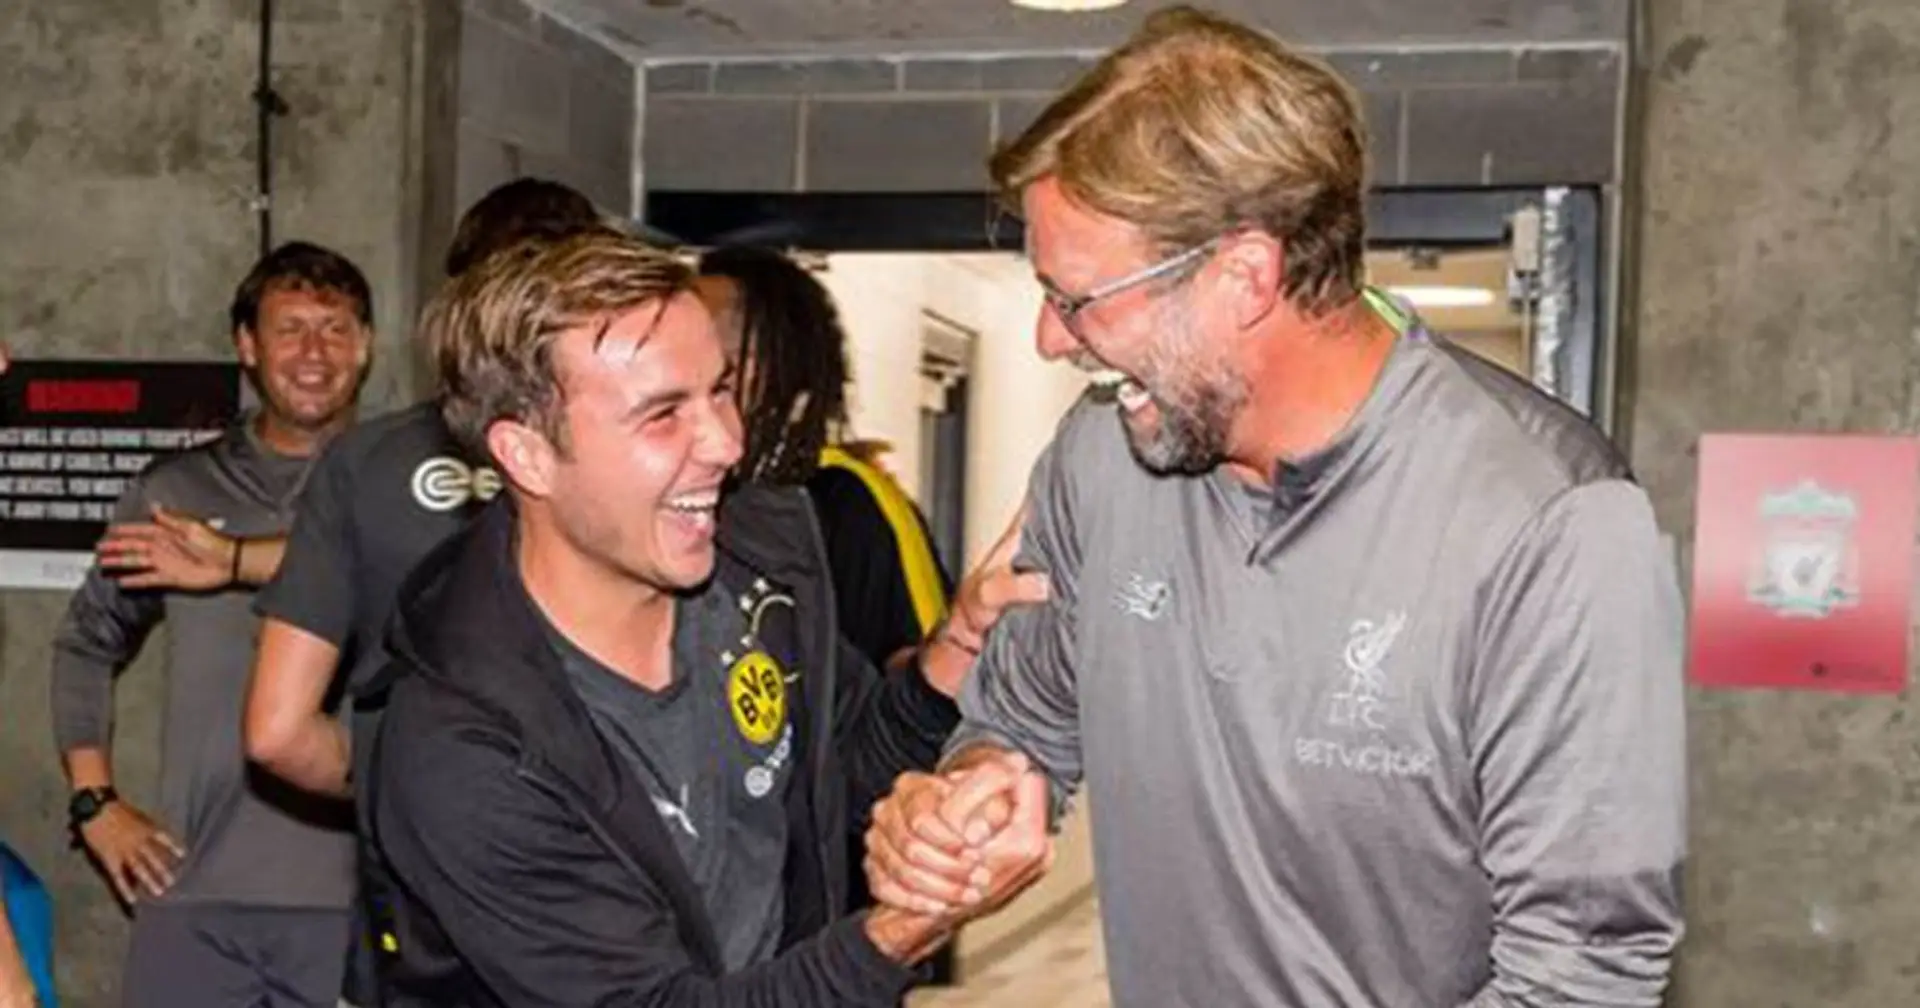 Bundesliga expert: Too early to rule out Gotze as potential target for Liverpool